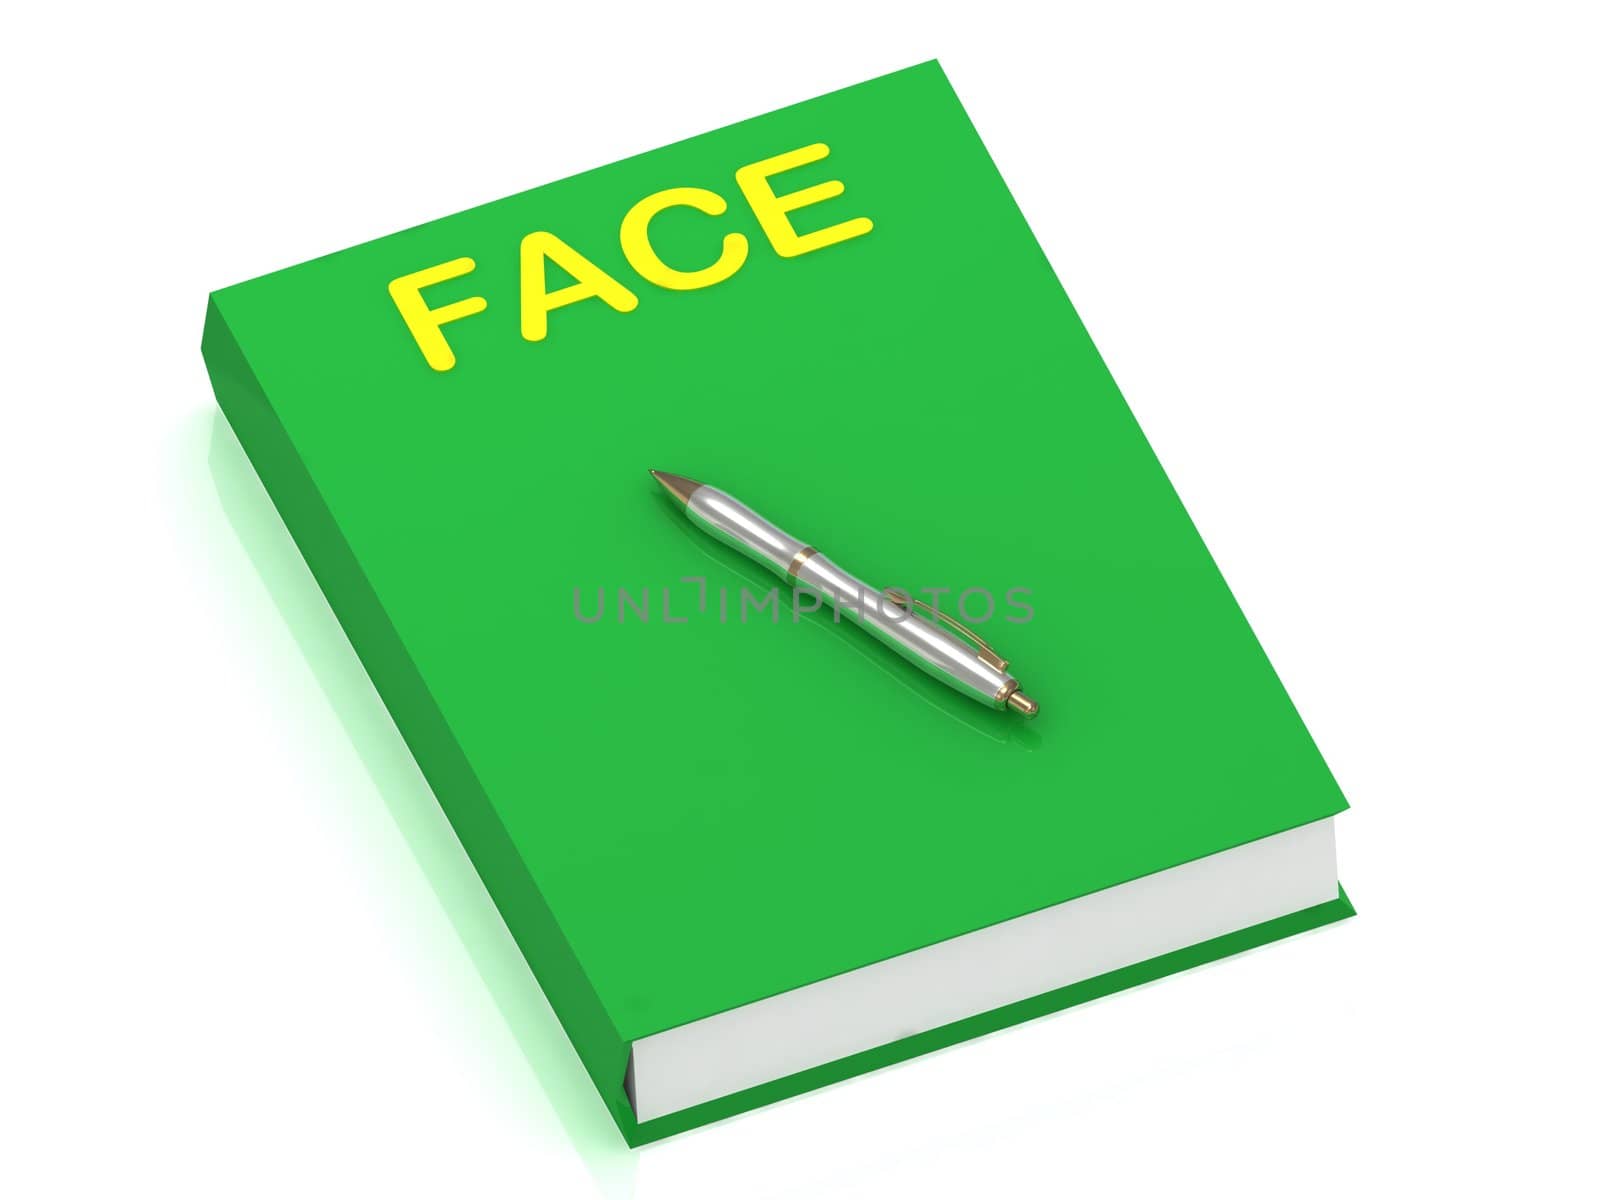 FACE name on cover book and silver pen on the book. 3D illustration isolated on white background